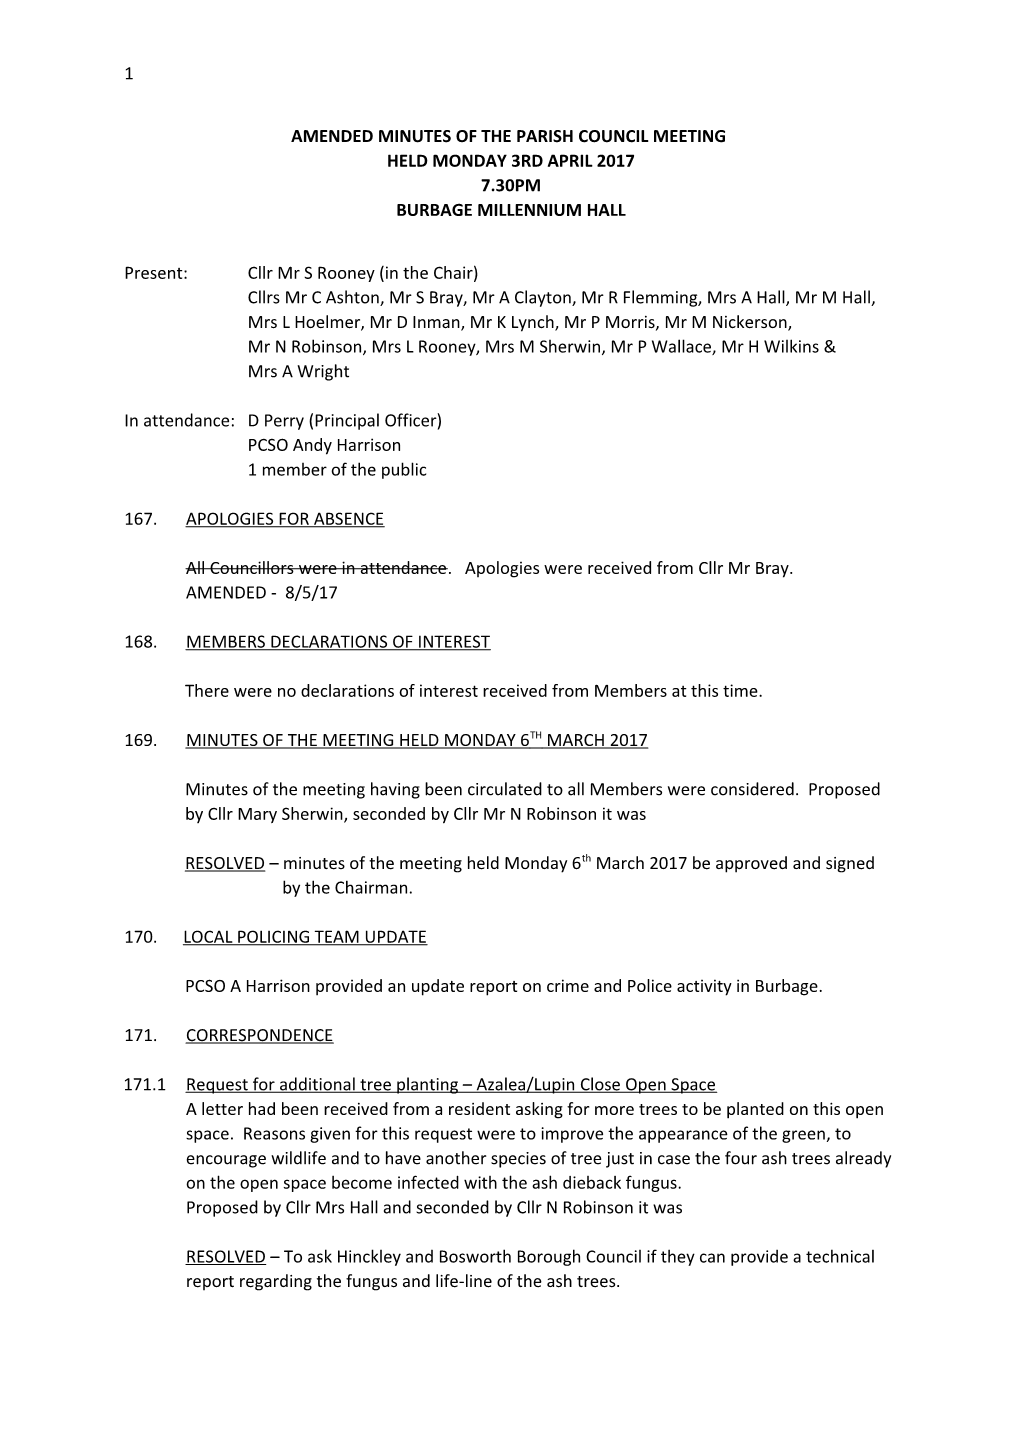 Amended Minutes of the Parish Council Meeting